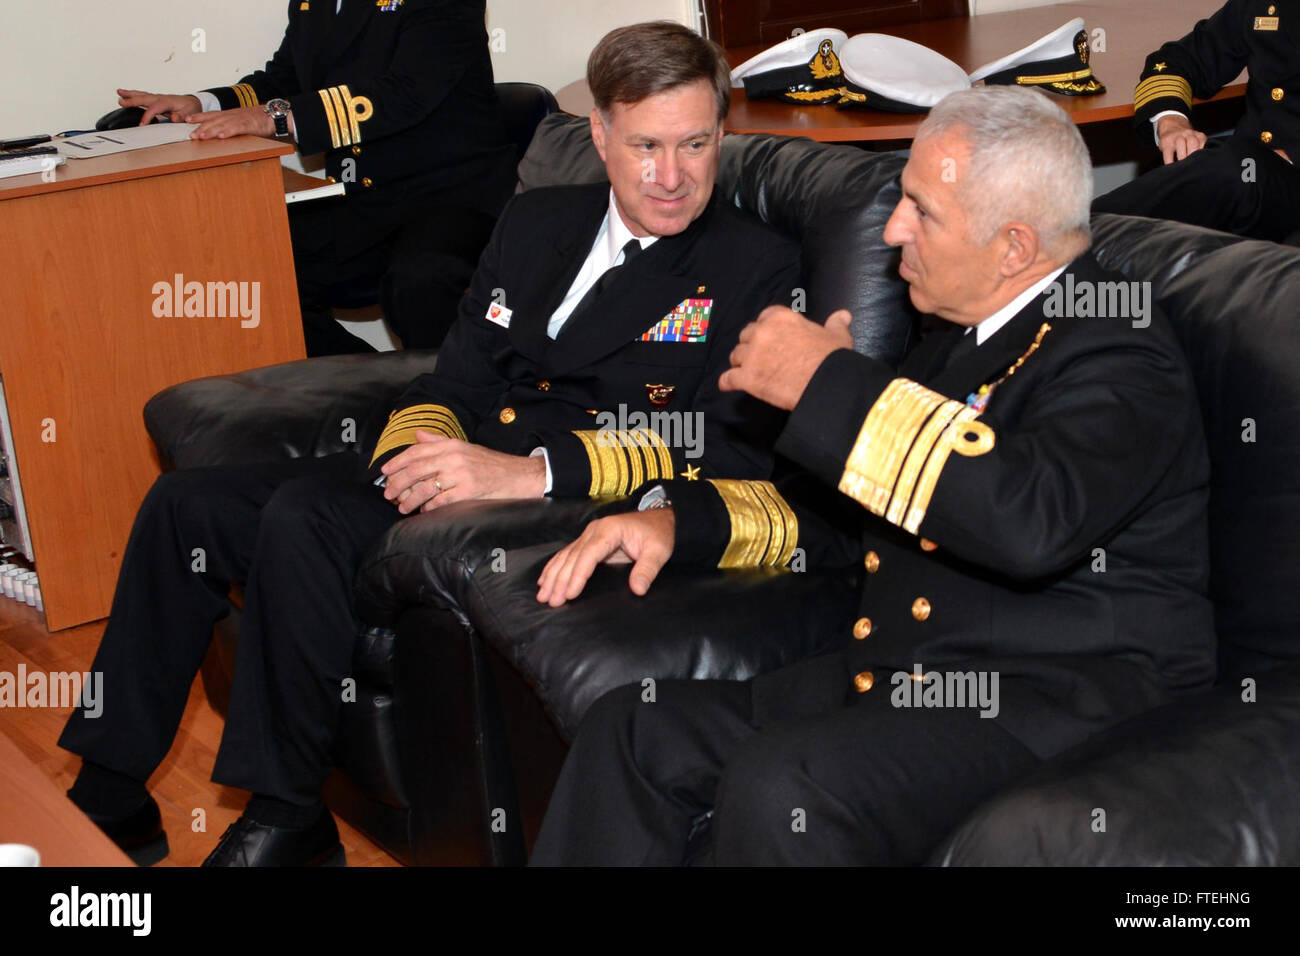 Adm. Mark Ferguson, commander, U.S. Naval Forces Europe-Africa, speaks with Vice Adm. Evangelos Apostolakis, Chief of the Hellenic Navy, during his visit to the Hellenic Naval Base Headquarters. Stock Photo